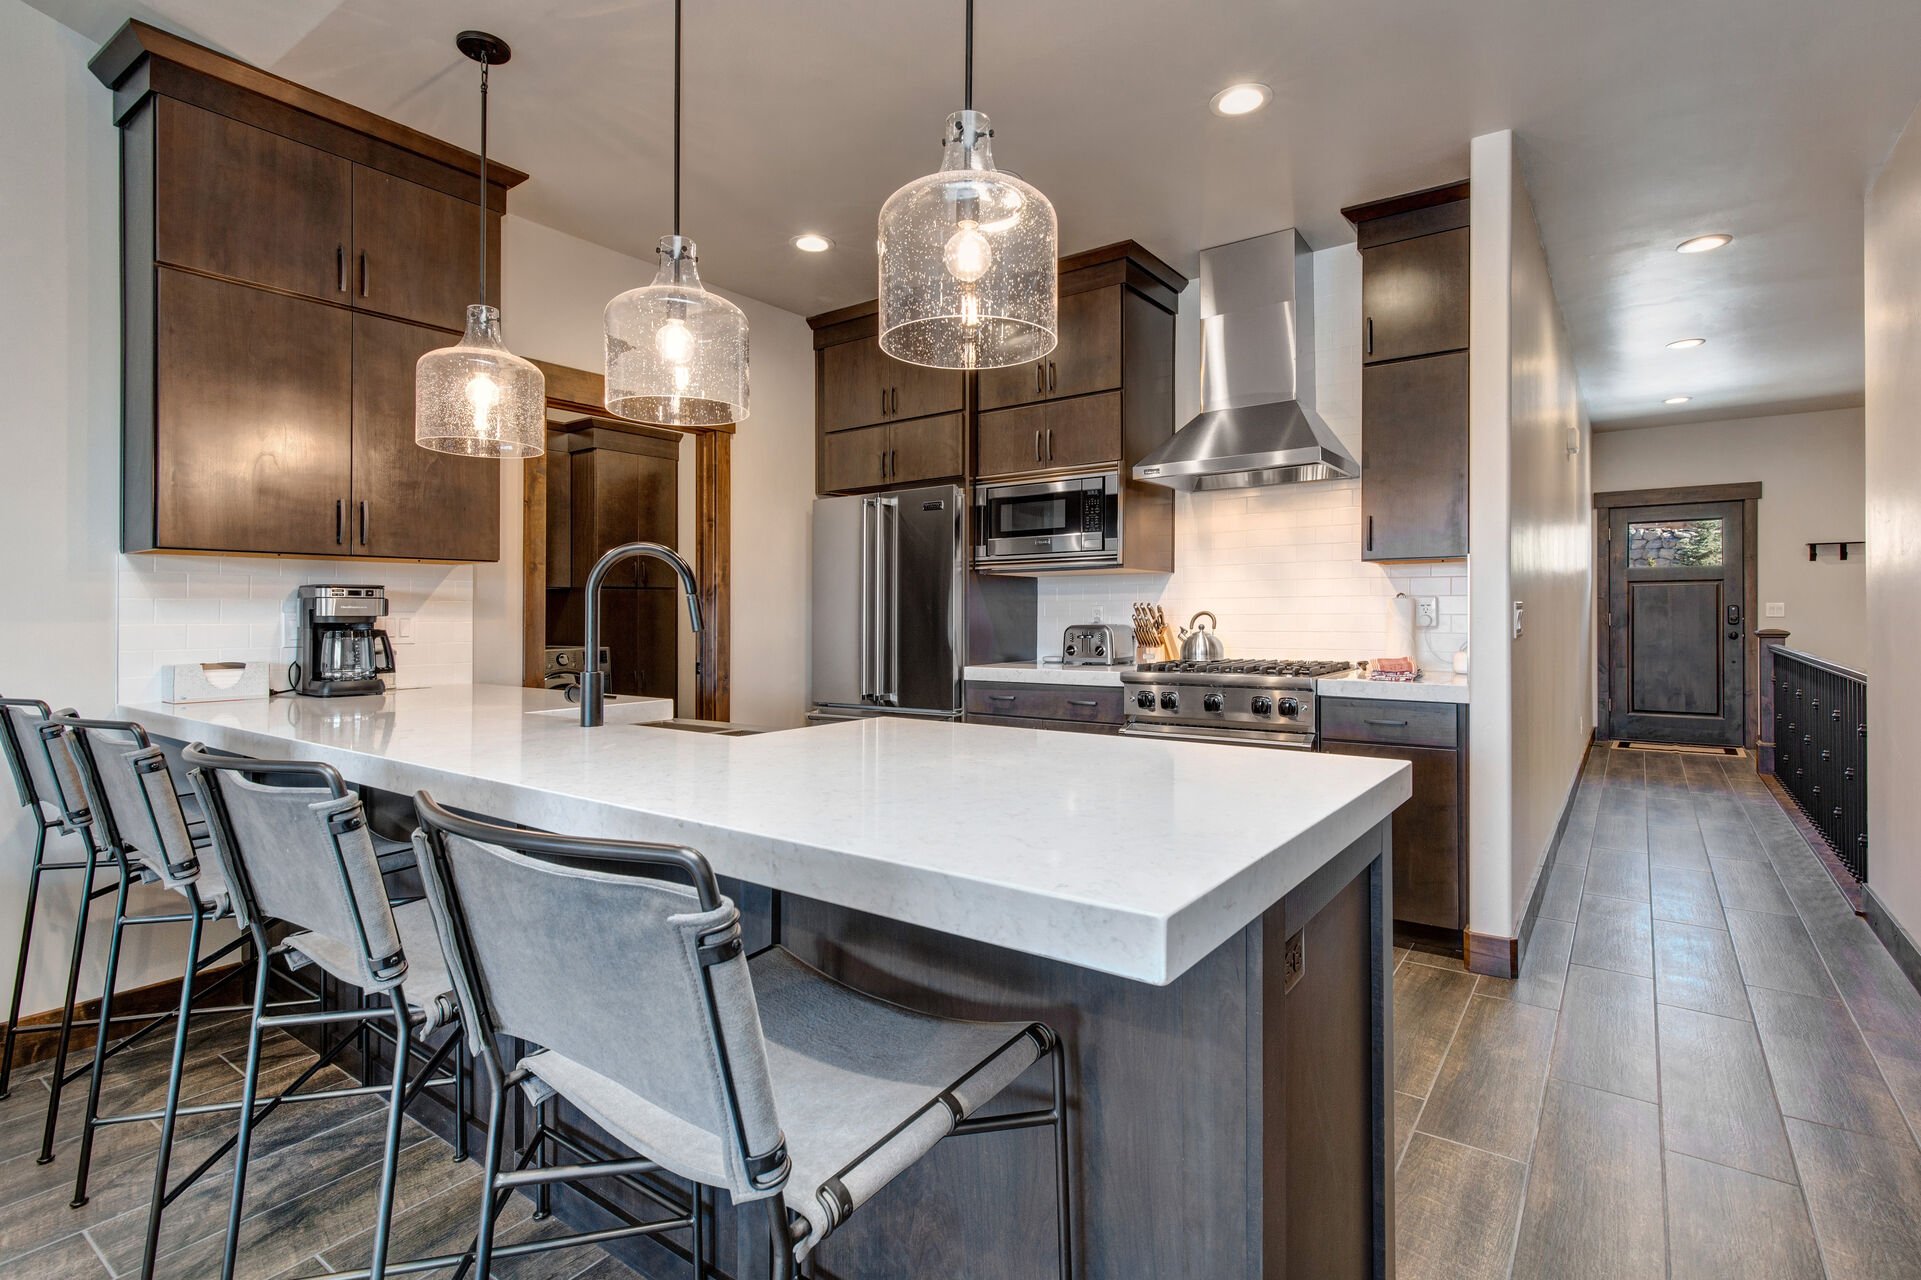 Fully Equipped Kitchen with bar seating for four, stone countertops, and stainless steel Viking appliances